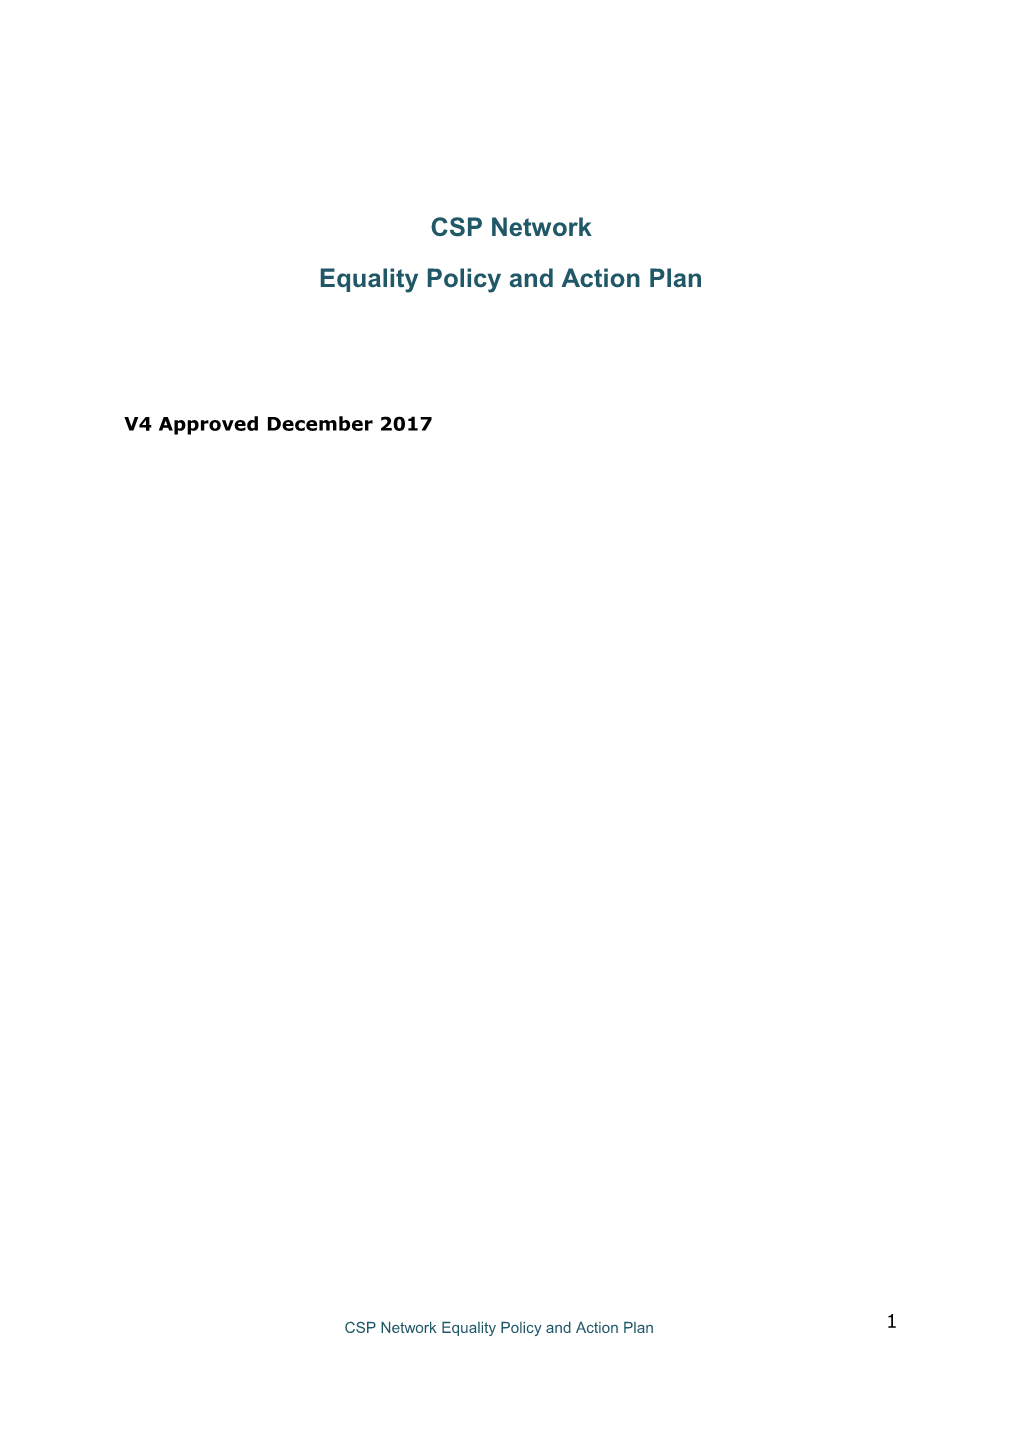 Equality Policy and Action Plan